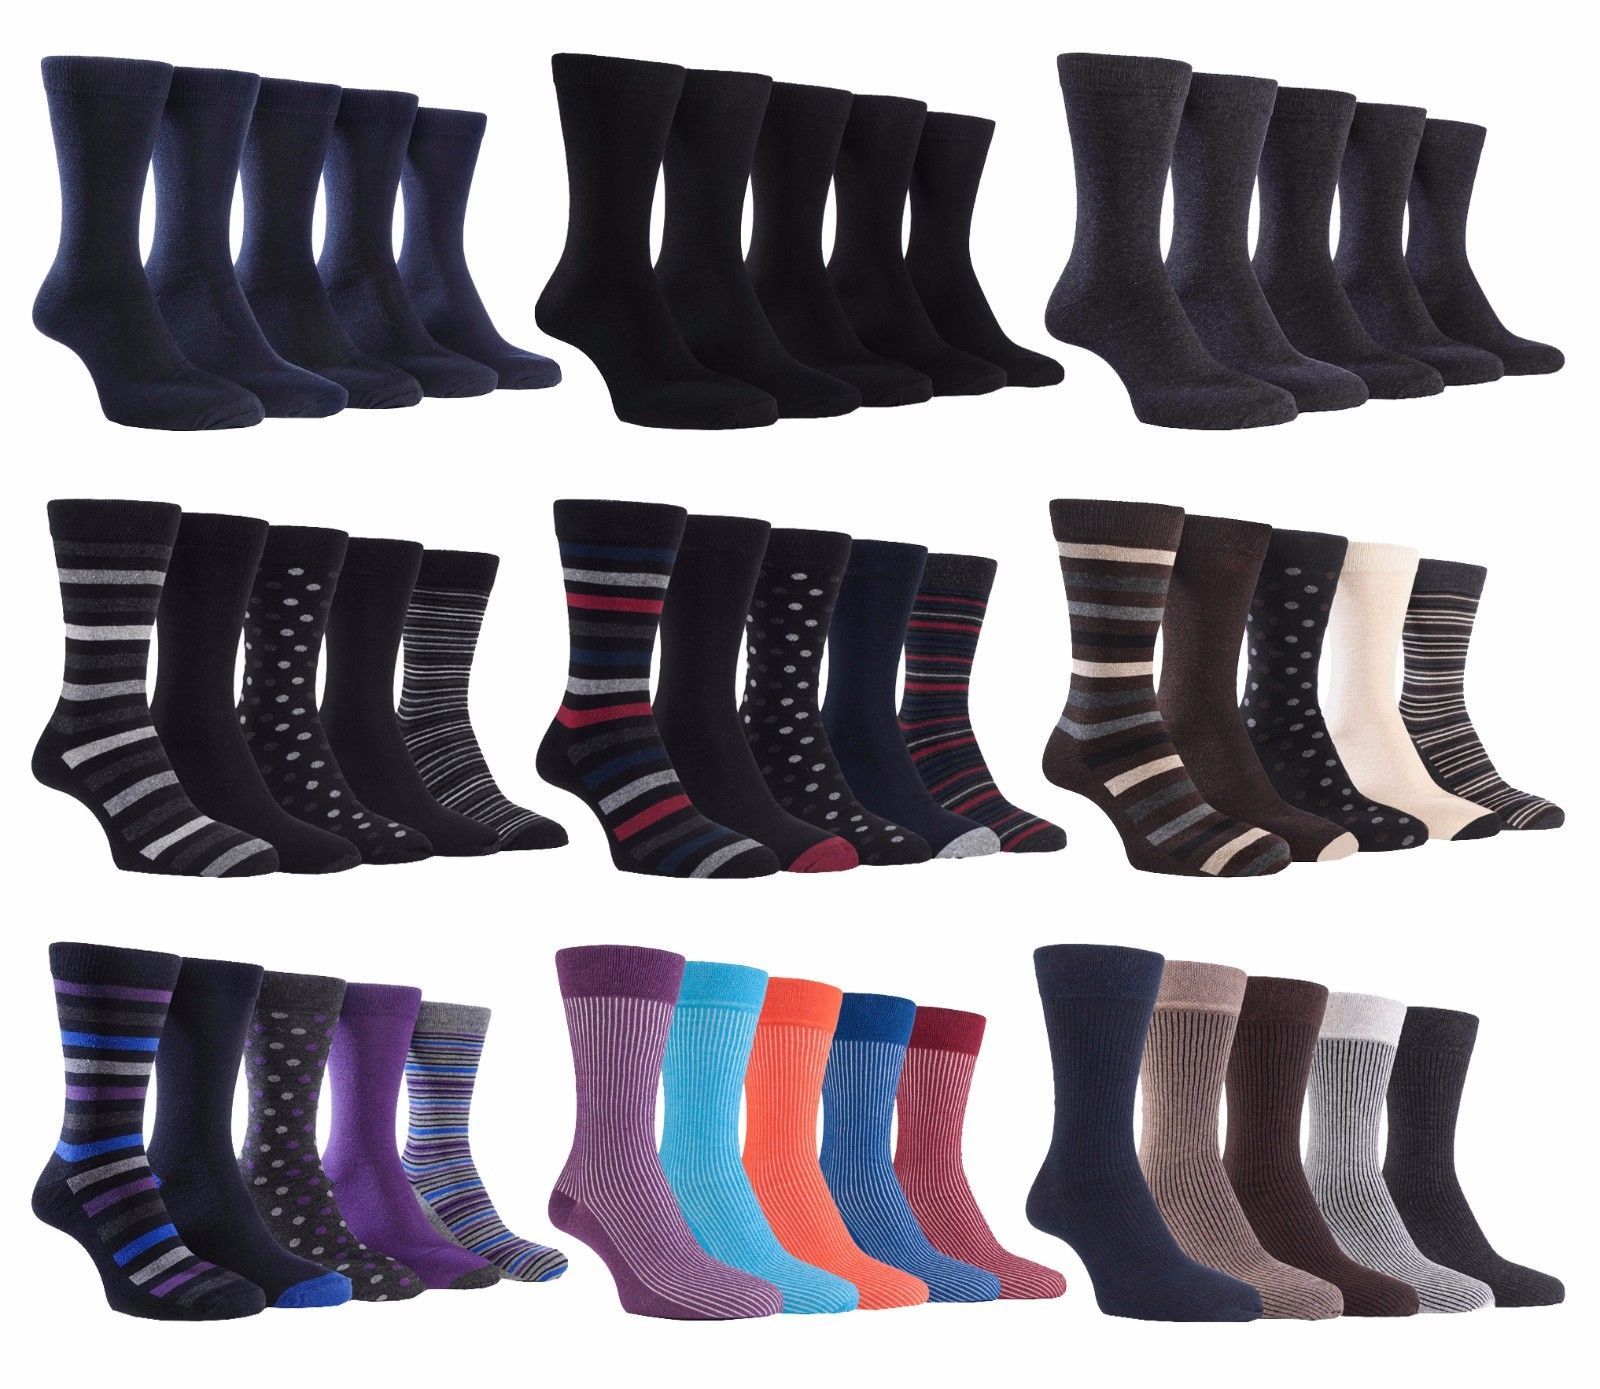 Farah - 5 Pack Mens Thin Soft Top Patterned Colorful Cotton Casual Dress Socks